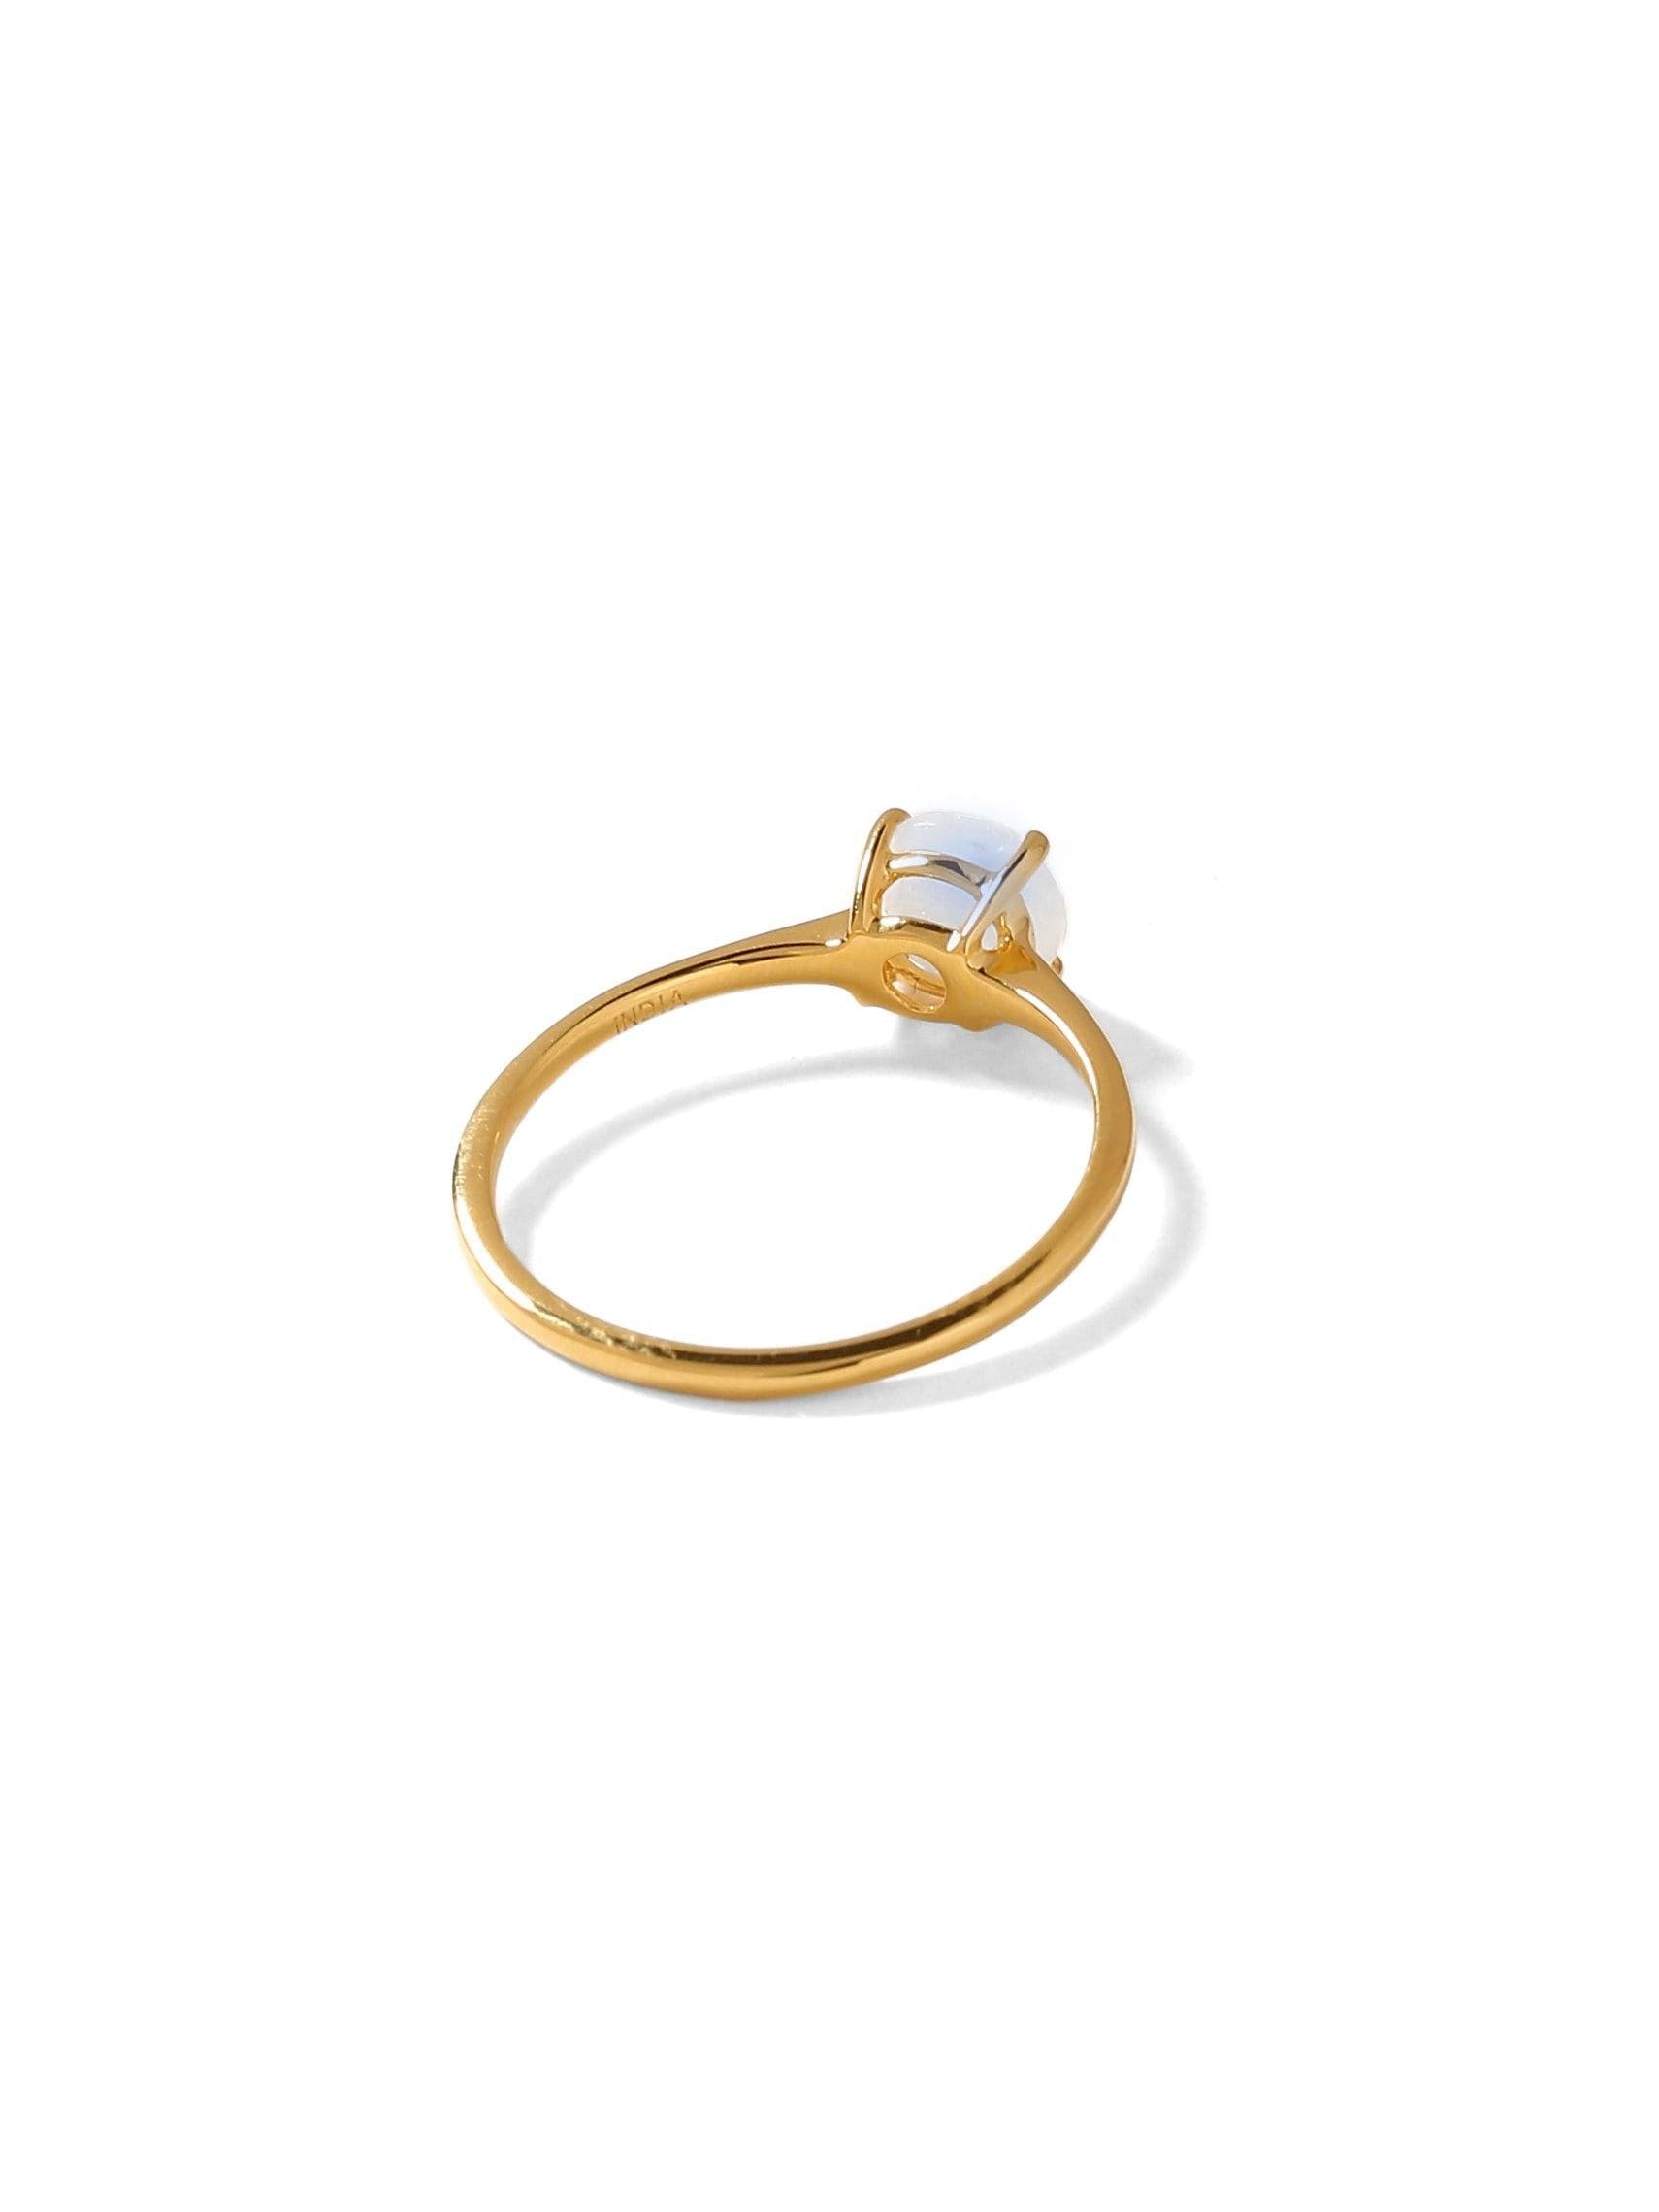 0.60 Ct Moonstone Solid 10k Yellow Gold Solitaire Ring Jewelry - YoTreasure